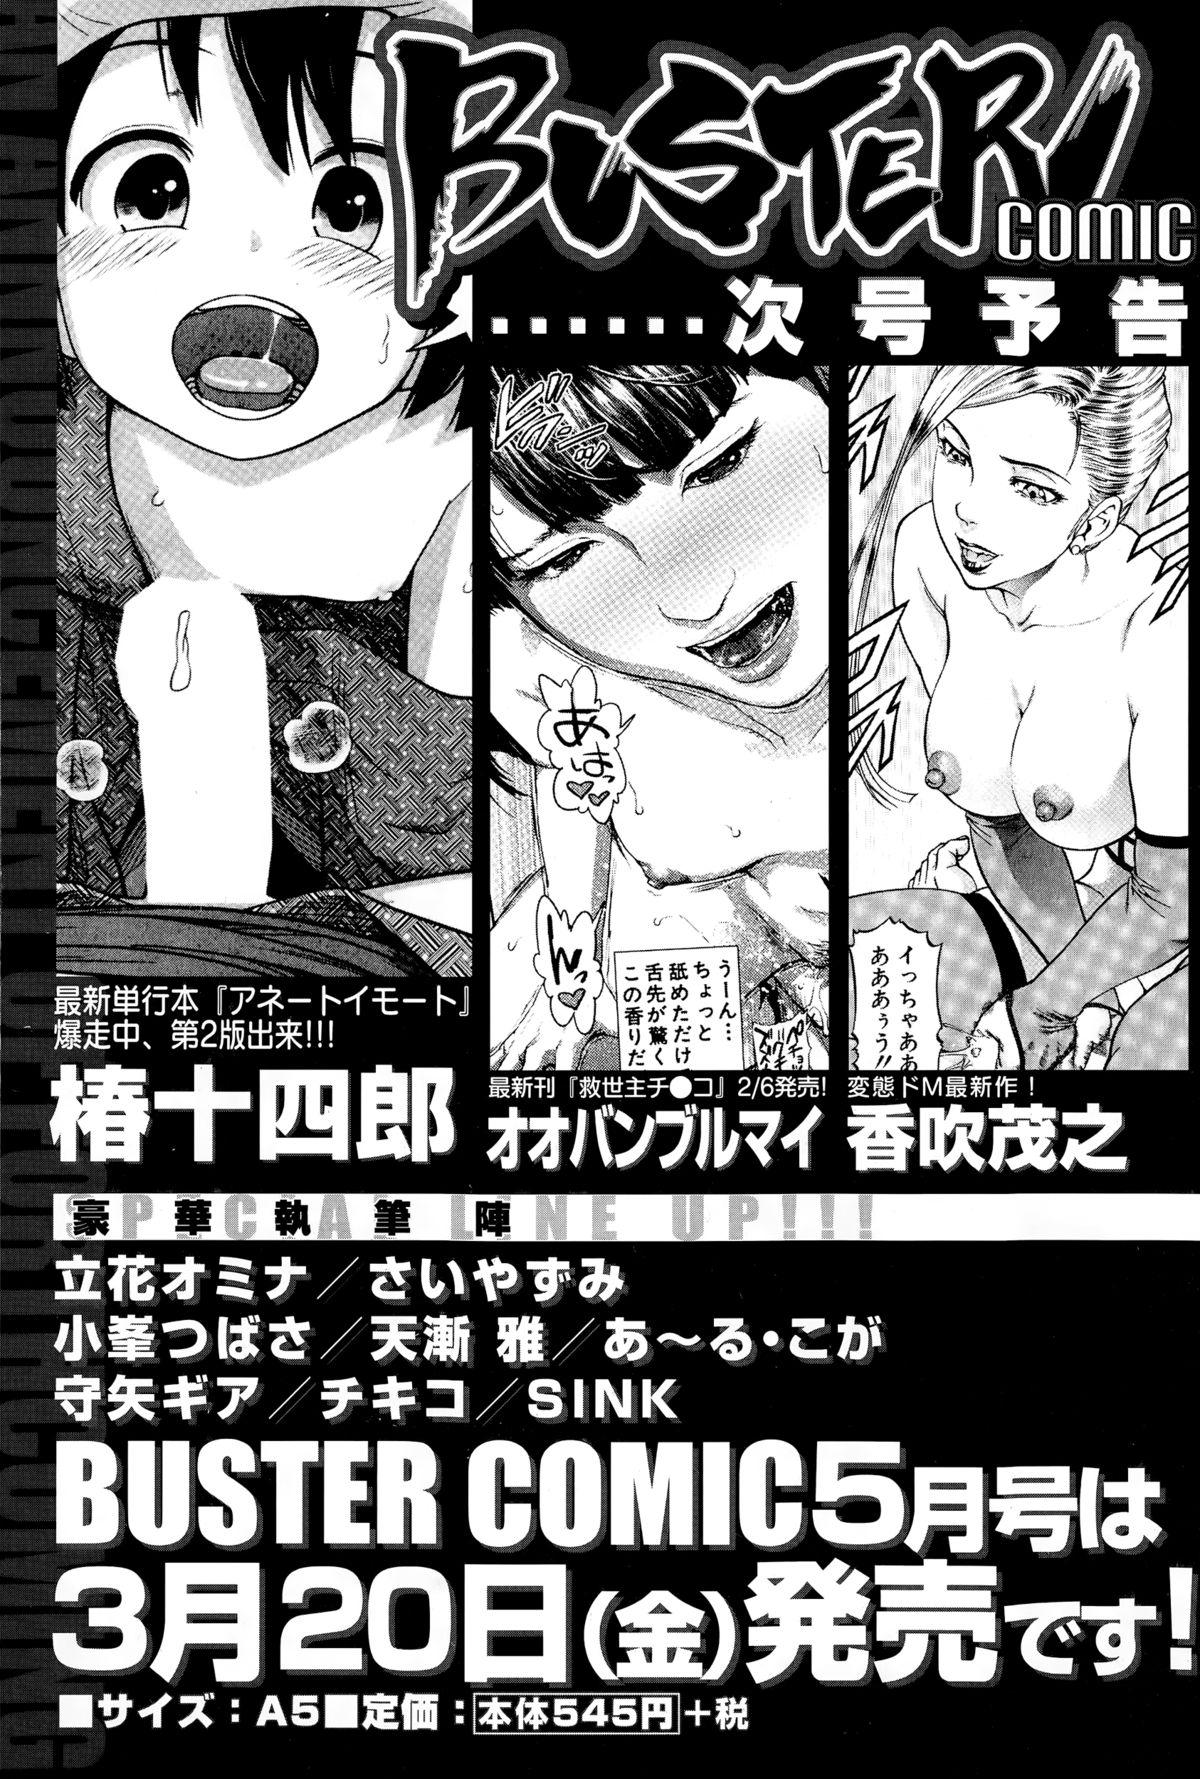 BUSTER COMIC 2015-03 468